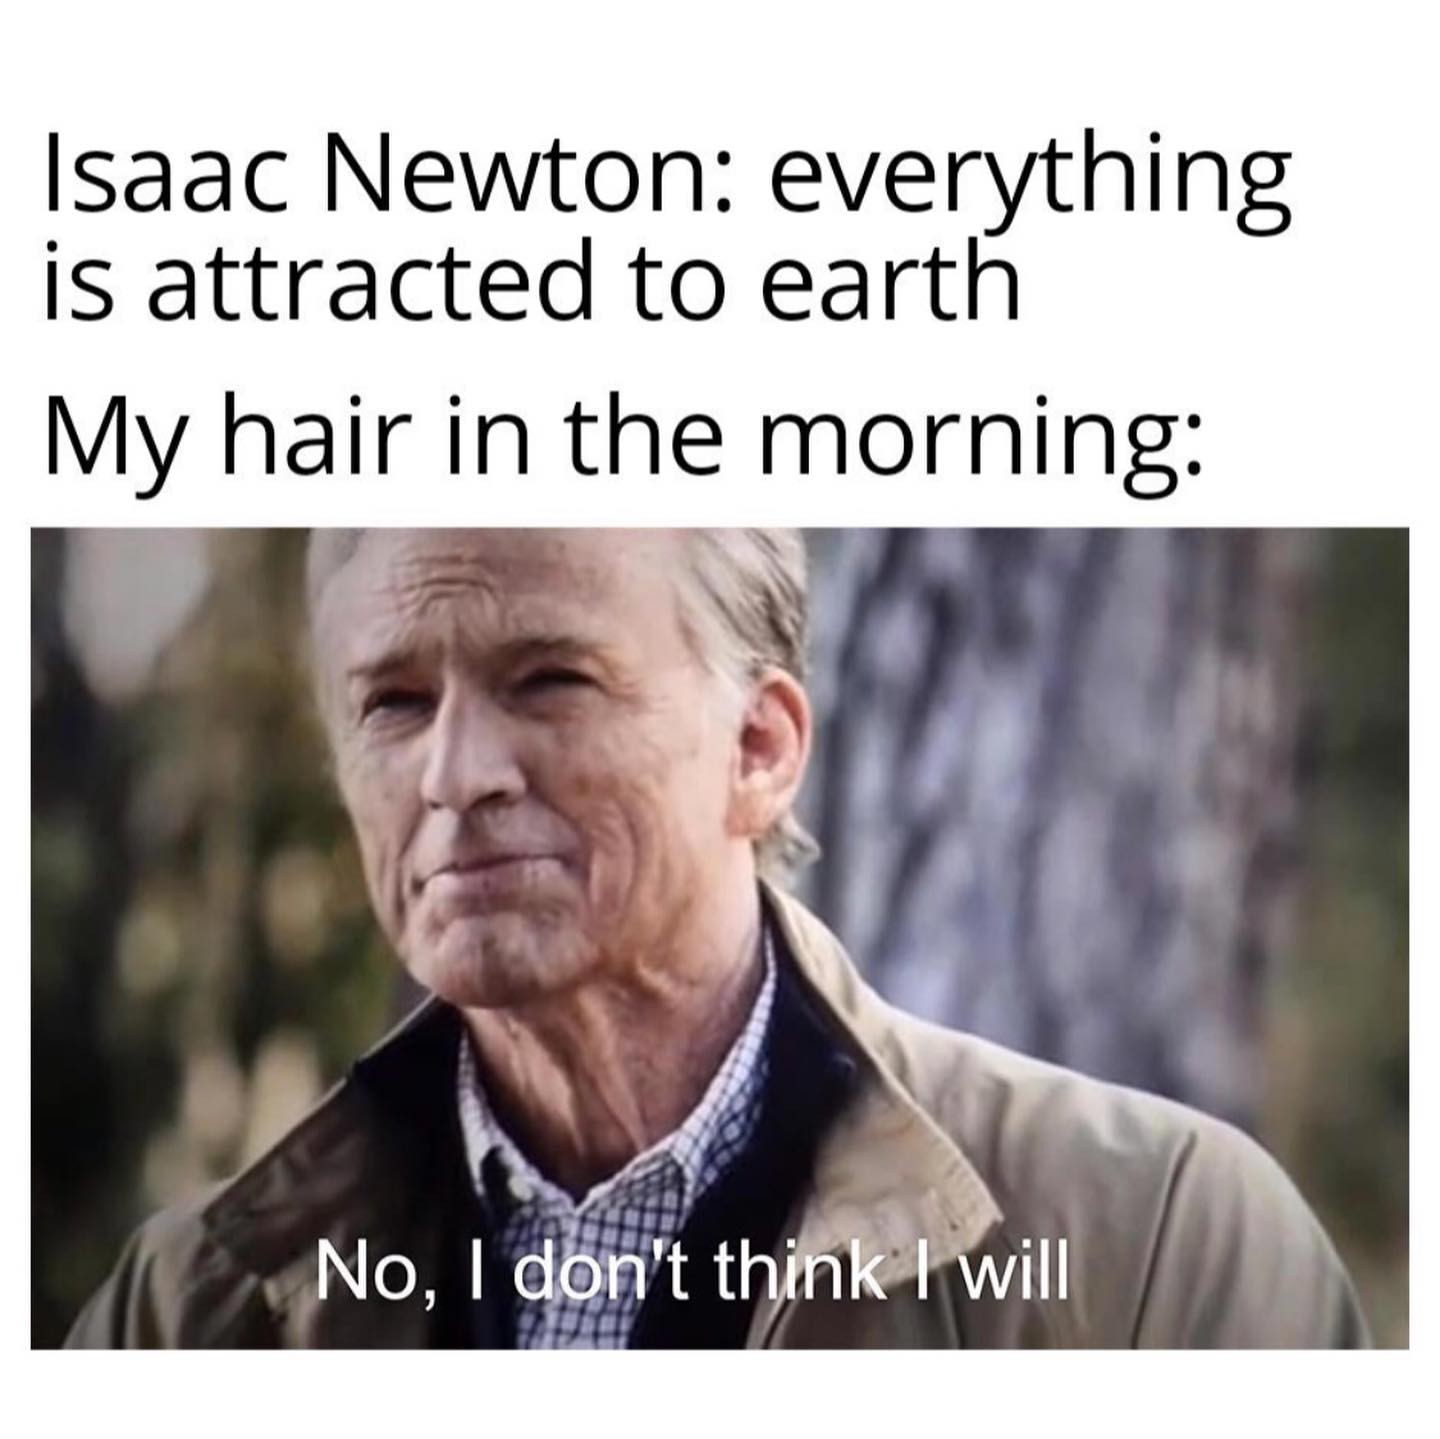 Isaac Newton: Everything is attracted to earth. My hair in the morning: No, I don't think I will.